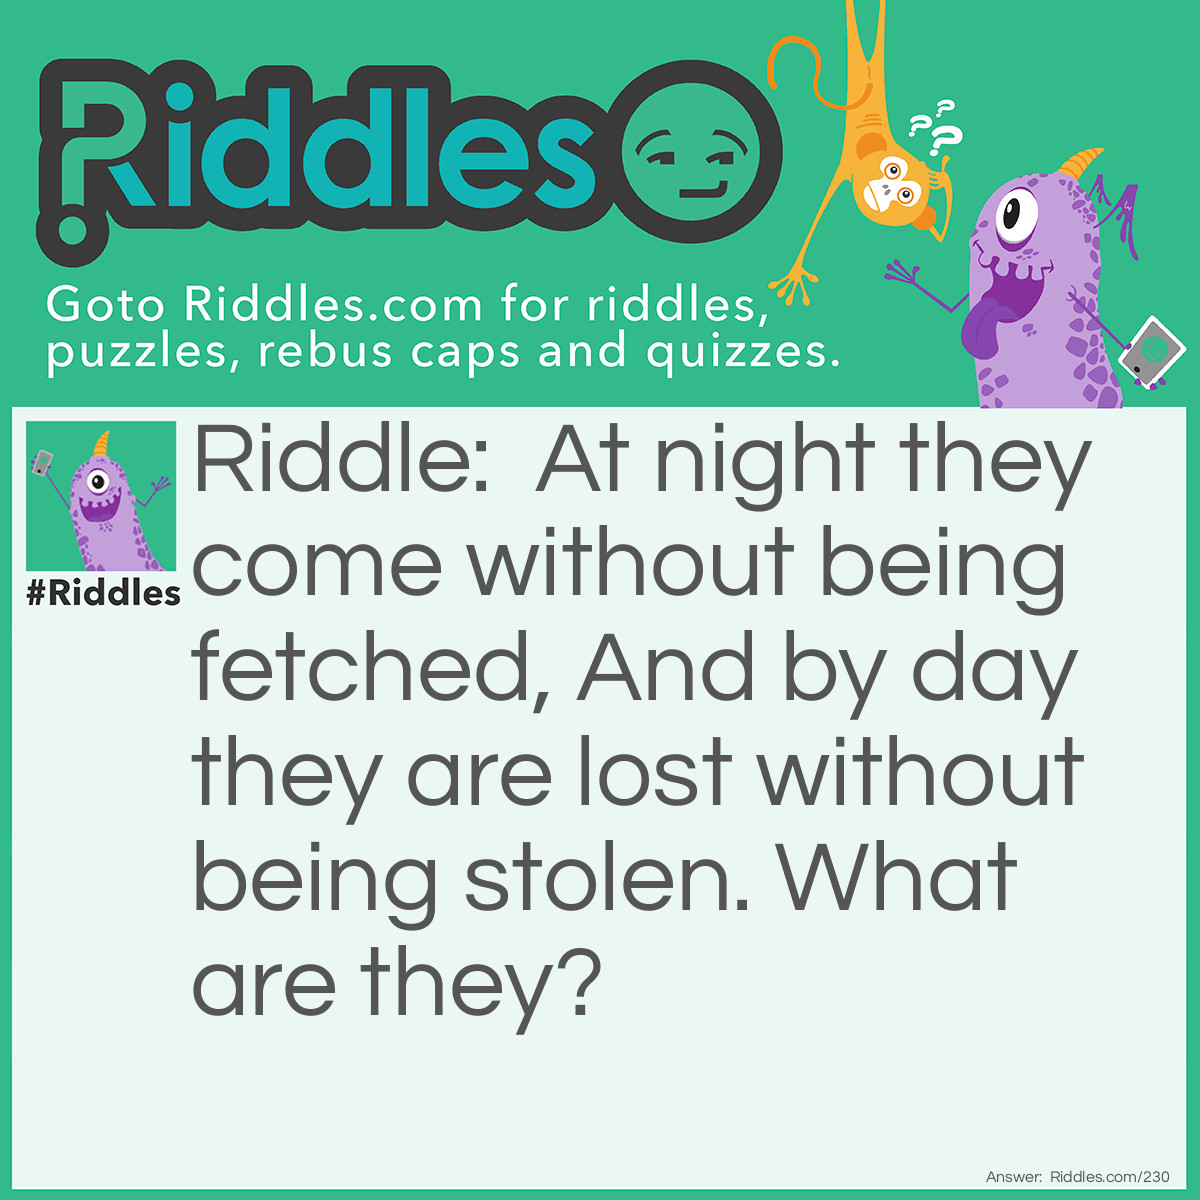 Riddle: At night they come without being fetched, And by day they are lost without being stolen. What are they? Answer: The stars.